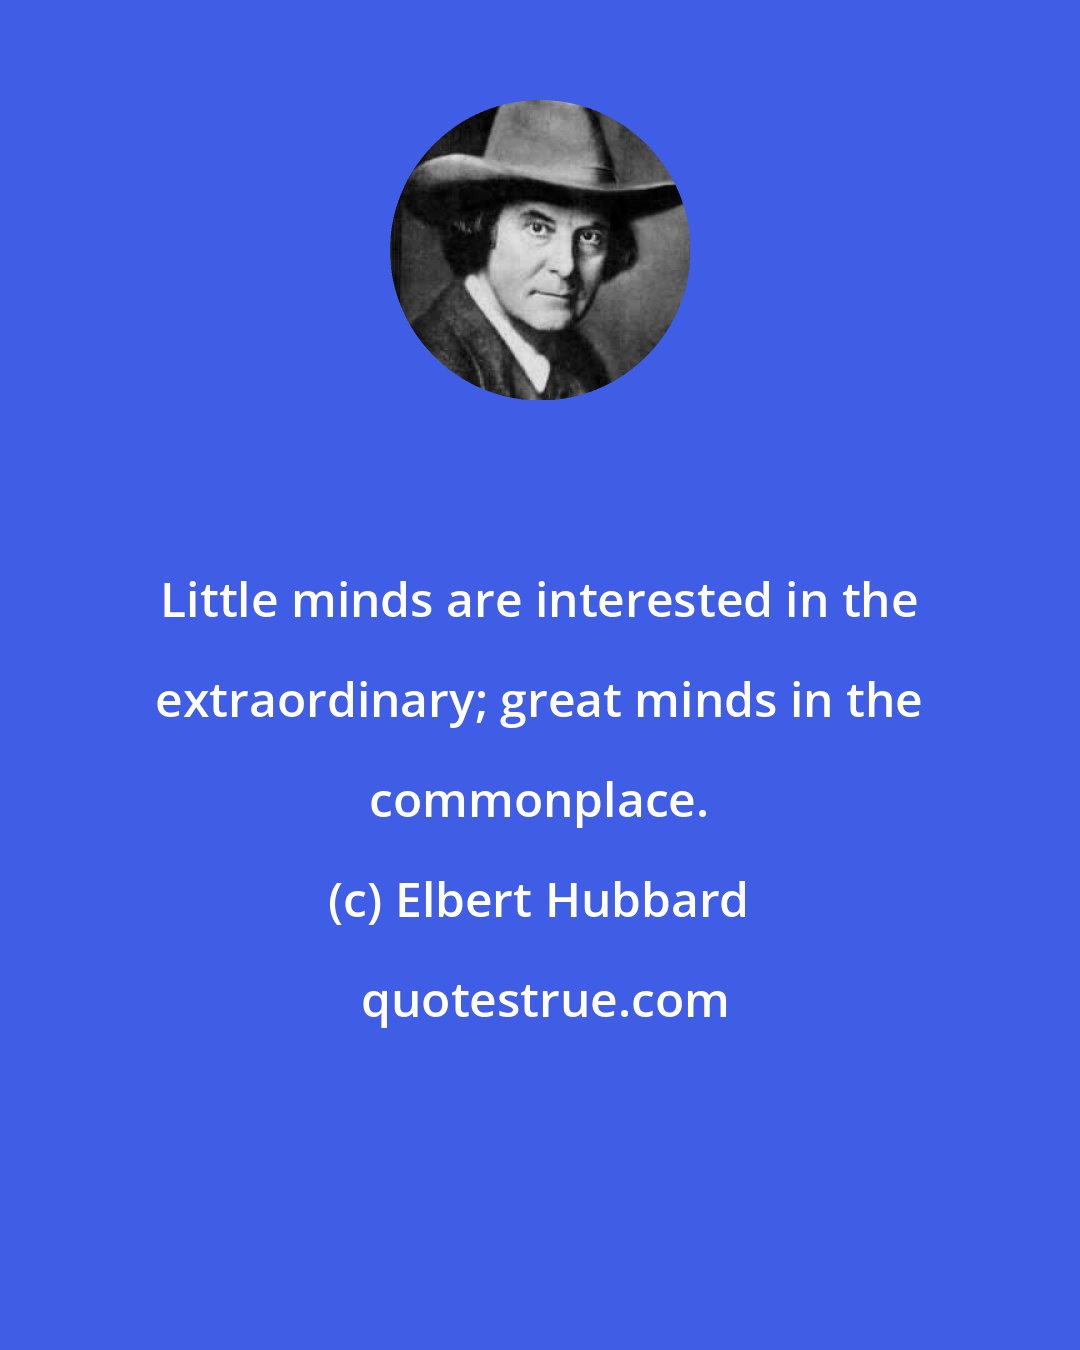 Elbert Hubbard: Little minds are interested in the extraordinary; great minds in the commonplace.